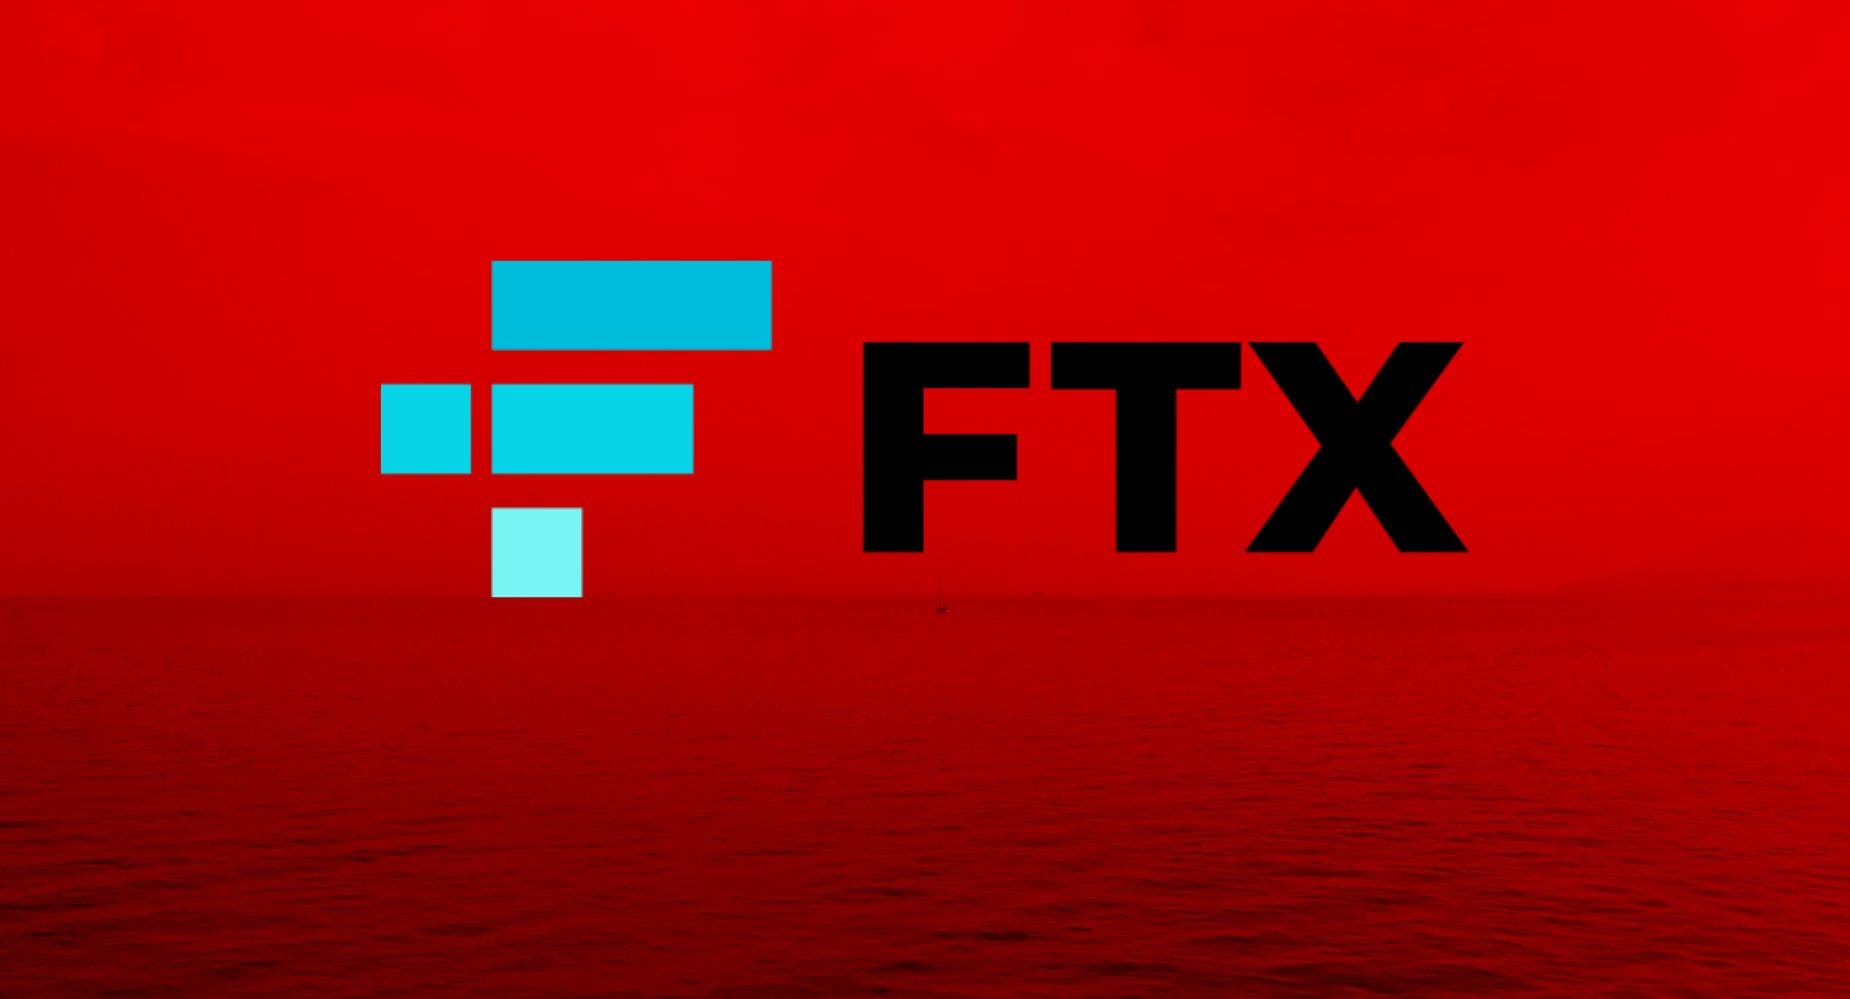 EXCLUSIVE: Marathon Digital CEO Fred Thiel Says FTX Bankruptcy 'Has Increased The Fear Factor'